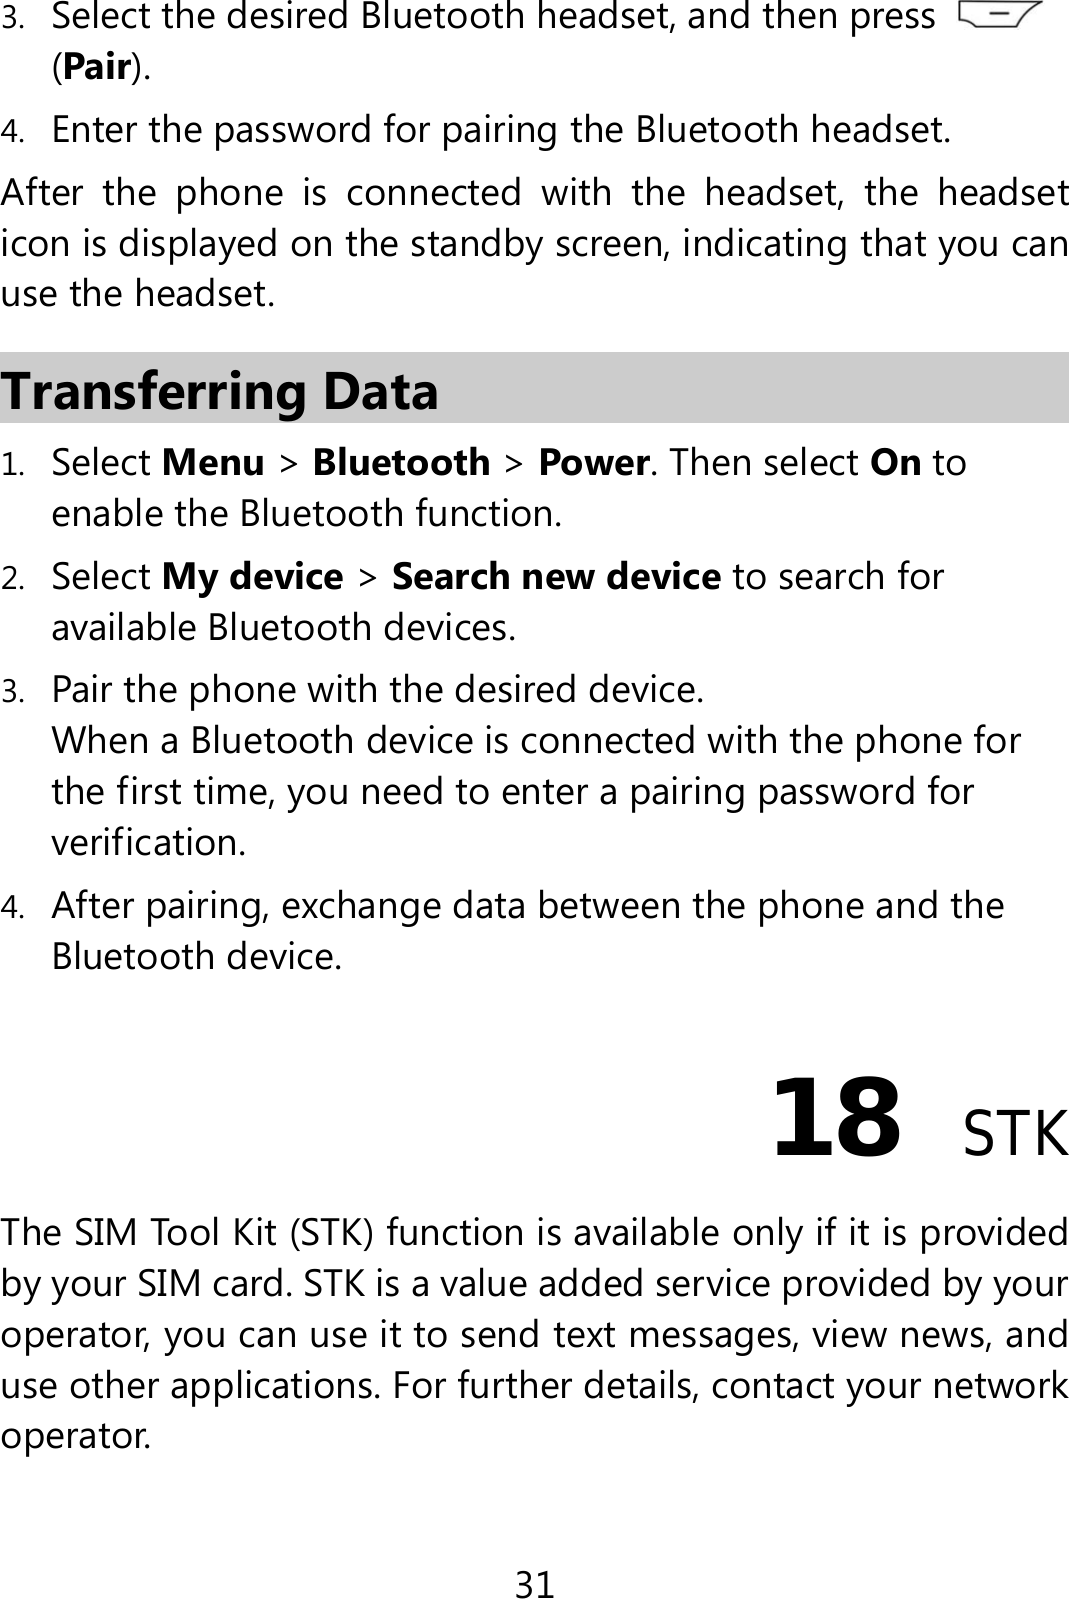 31 3. Select the desired Bluetooth headset, and then press   (Pair). 4. Enter the password for pairing the Bluetooth headset. After the phone is connected with the headset, the headset icon is displayed on the standby screen, indicating that you can use the headset. Transferring Data 1. Select Menu &gt; Bluetooth &gt; Power. Then select On to enable the Bluetooth function. 2. Select My device &gt; Search new device to search for available Bluetooth devices.   3. Pair the phone with the desired device. When a Bluetooth device is connected with the phone for the first time, you need to enter a pairing password for verification. 4. After pairing, exchange data between the phone and the Bluetooth device. 18  STK The SIM Tool Kit (STK) function is available only if it is provided by your SIM card. STK is a value added service provided by your operator, you can use it to send text messages, view news, and use other applications. For further details, contact your network operator. 